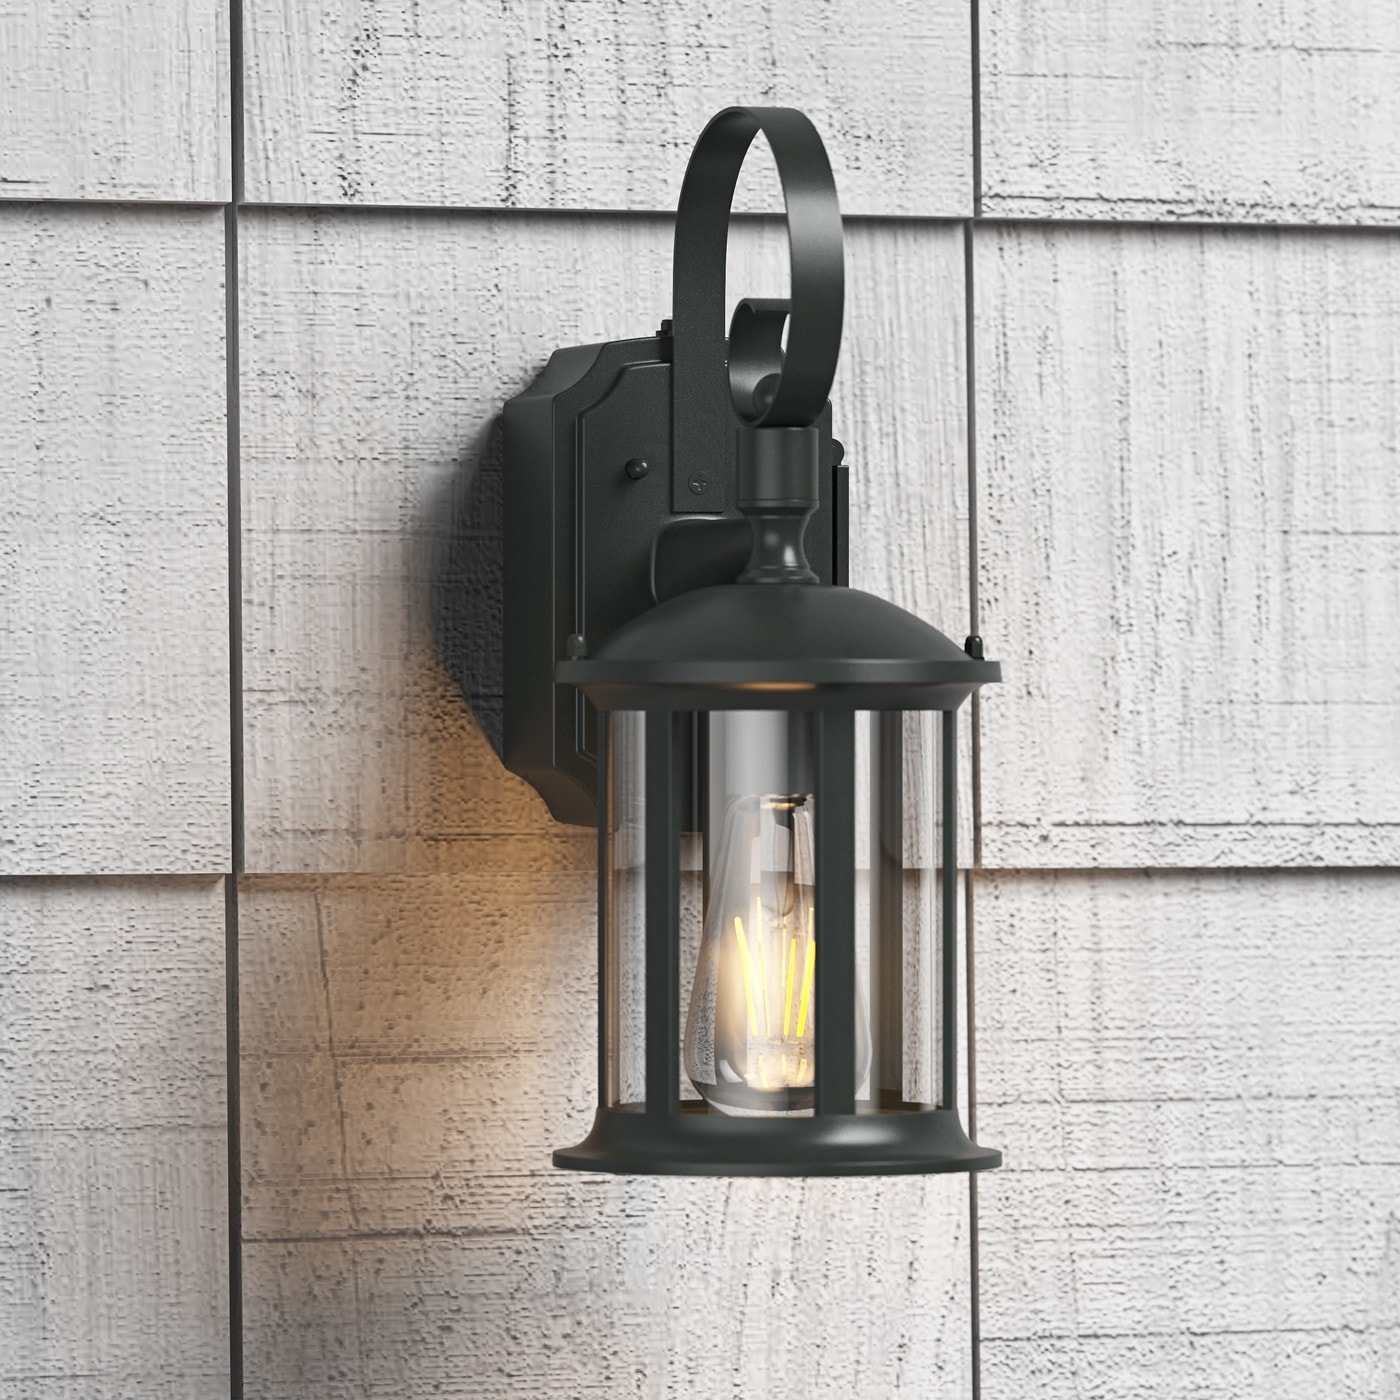 Modern Dusk To Dawn Sensor GFCI Outlet Glass Outdoor Wall Sconces Bed  Bath  Beyond 37594332